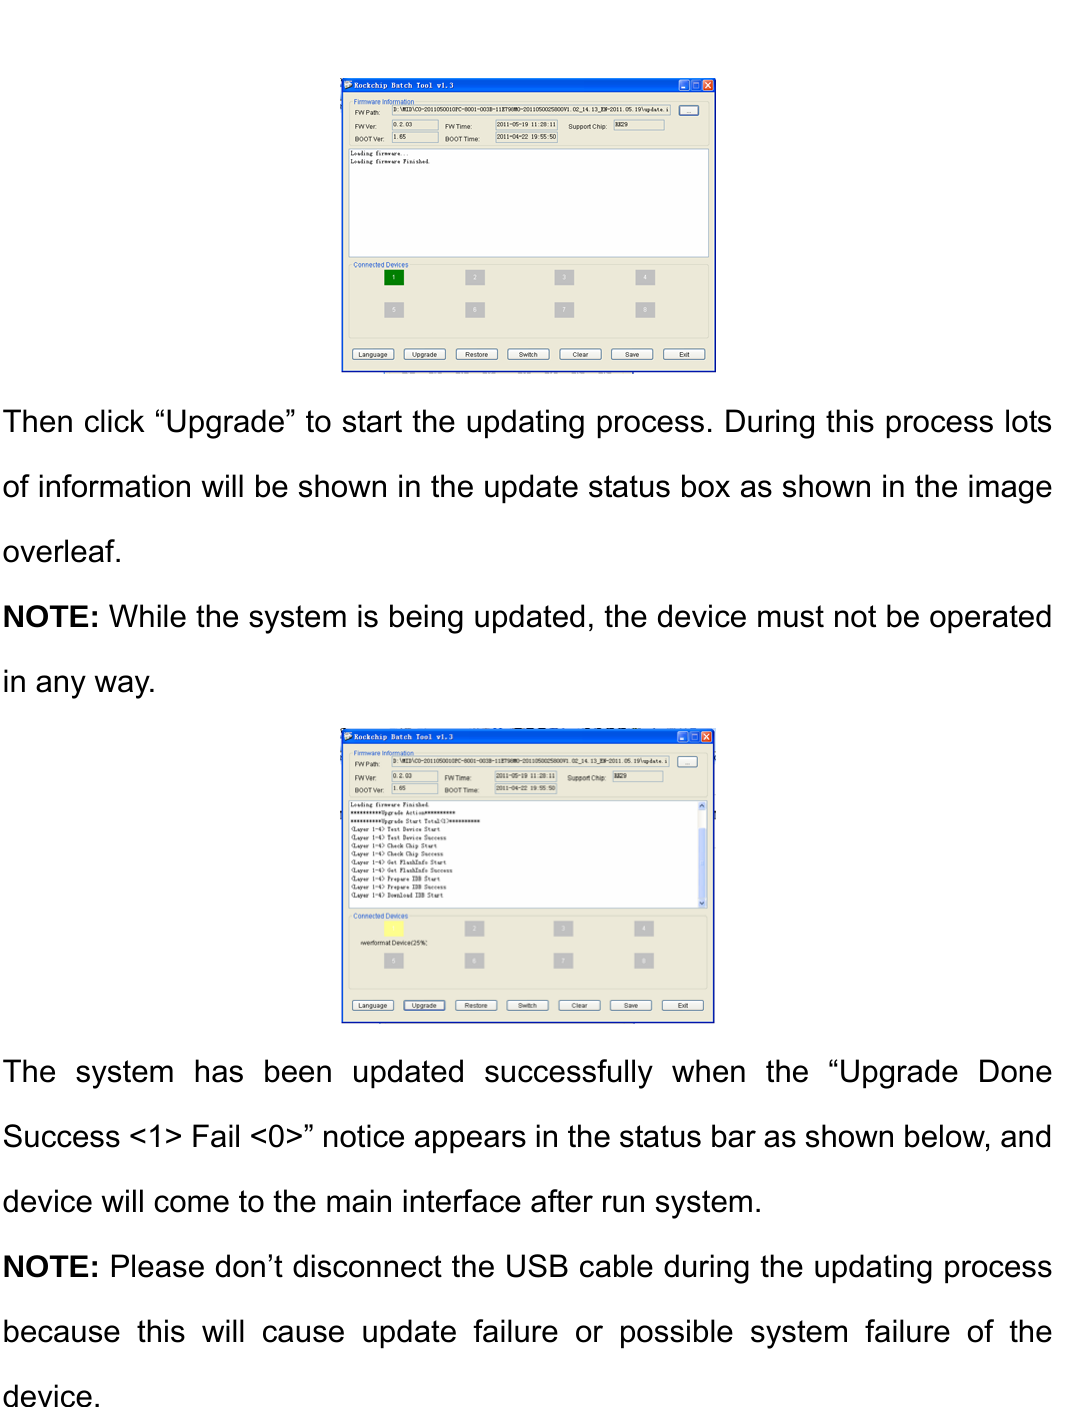     Then click “Upgrade” to start the updating process. During this process lots of information will be shown in the update status box as shown in the image overleaf.  NOTE: While the system is being updated, the device must not be operated in any way.  The system has been updated successfully when the “Upgrade Done Success &lt;1&gt; Fail &lt;0&gt;” notice appears in the status bar as shown below, and device will come to the main interface after run system. NOTE: Please don’t disconnect the USB cable during the updating process because this will cause update failure or possible system failure of the device.   